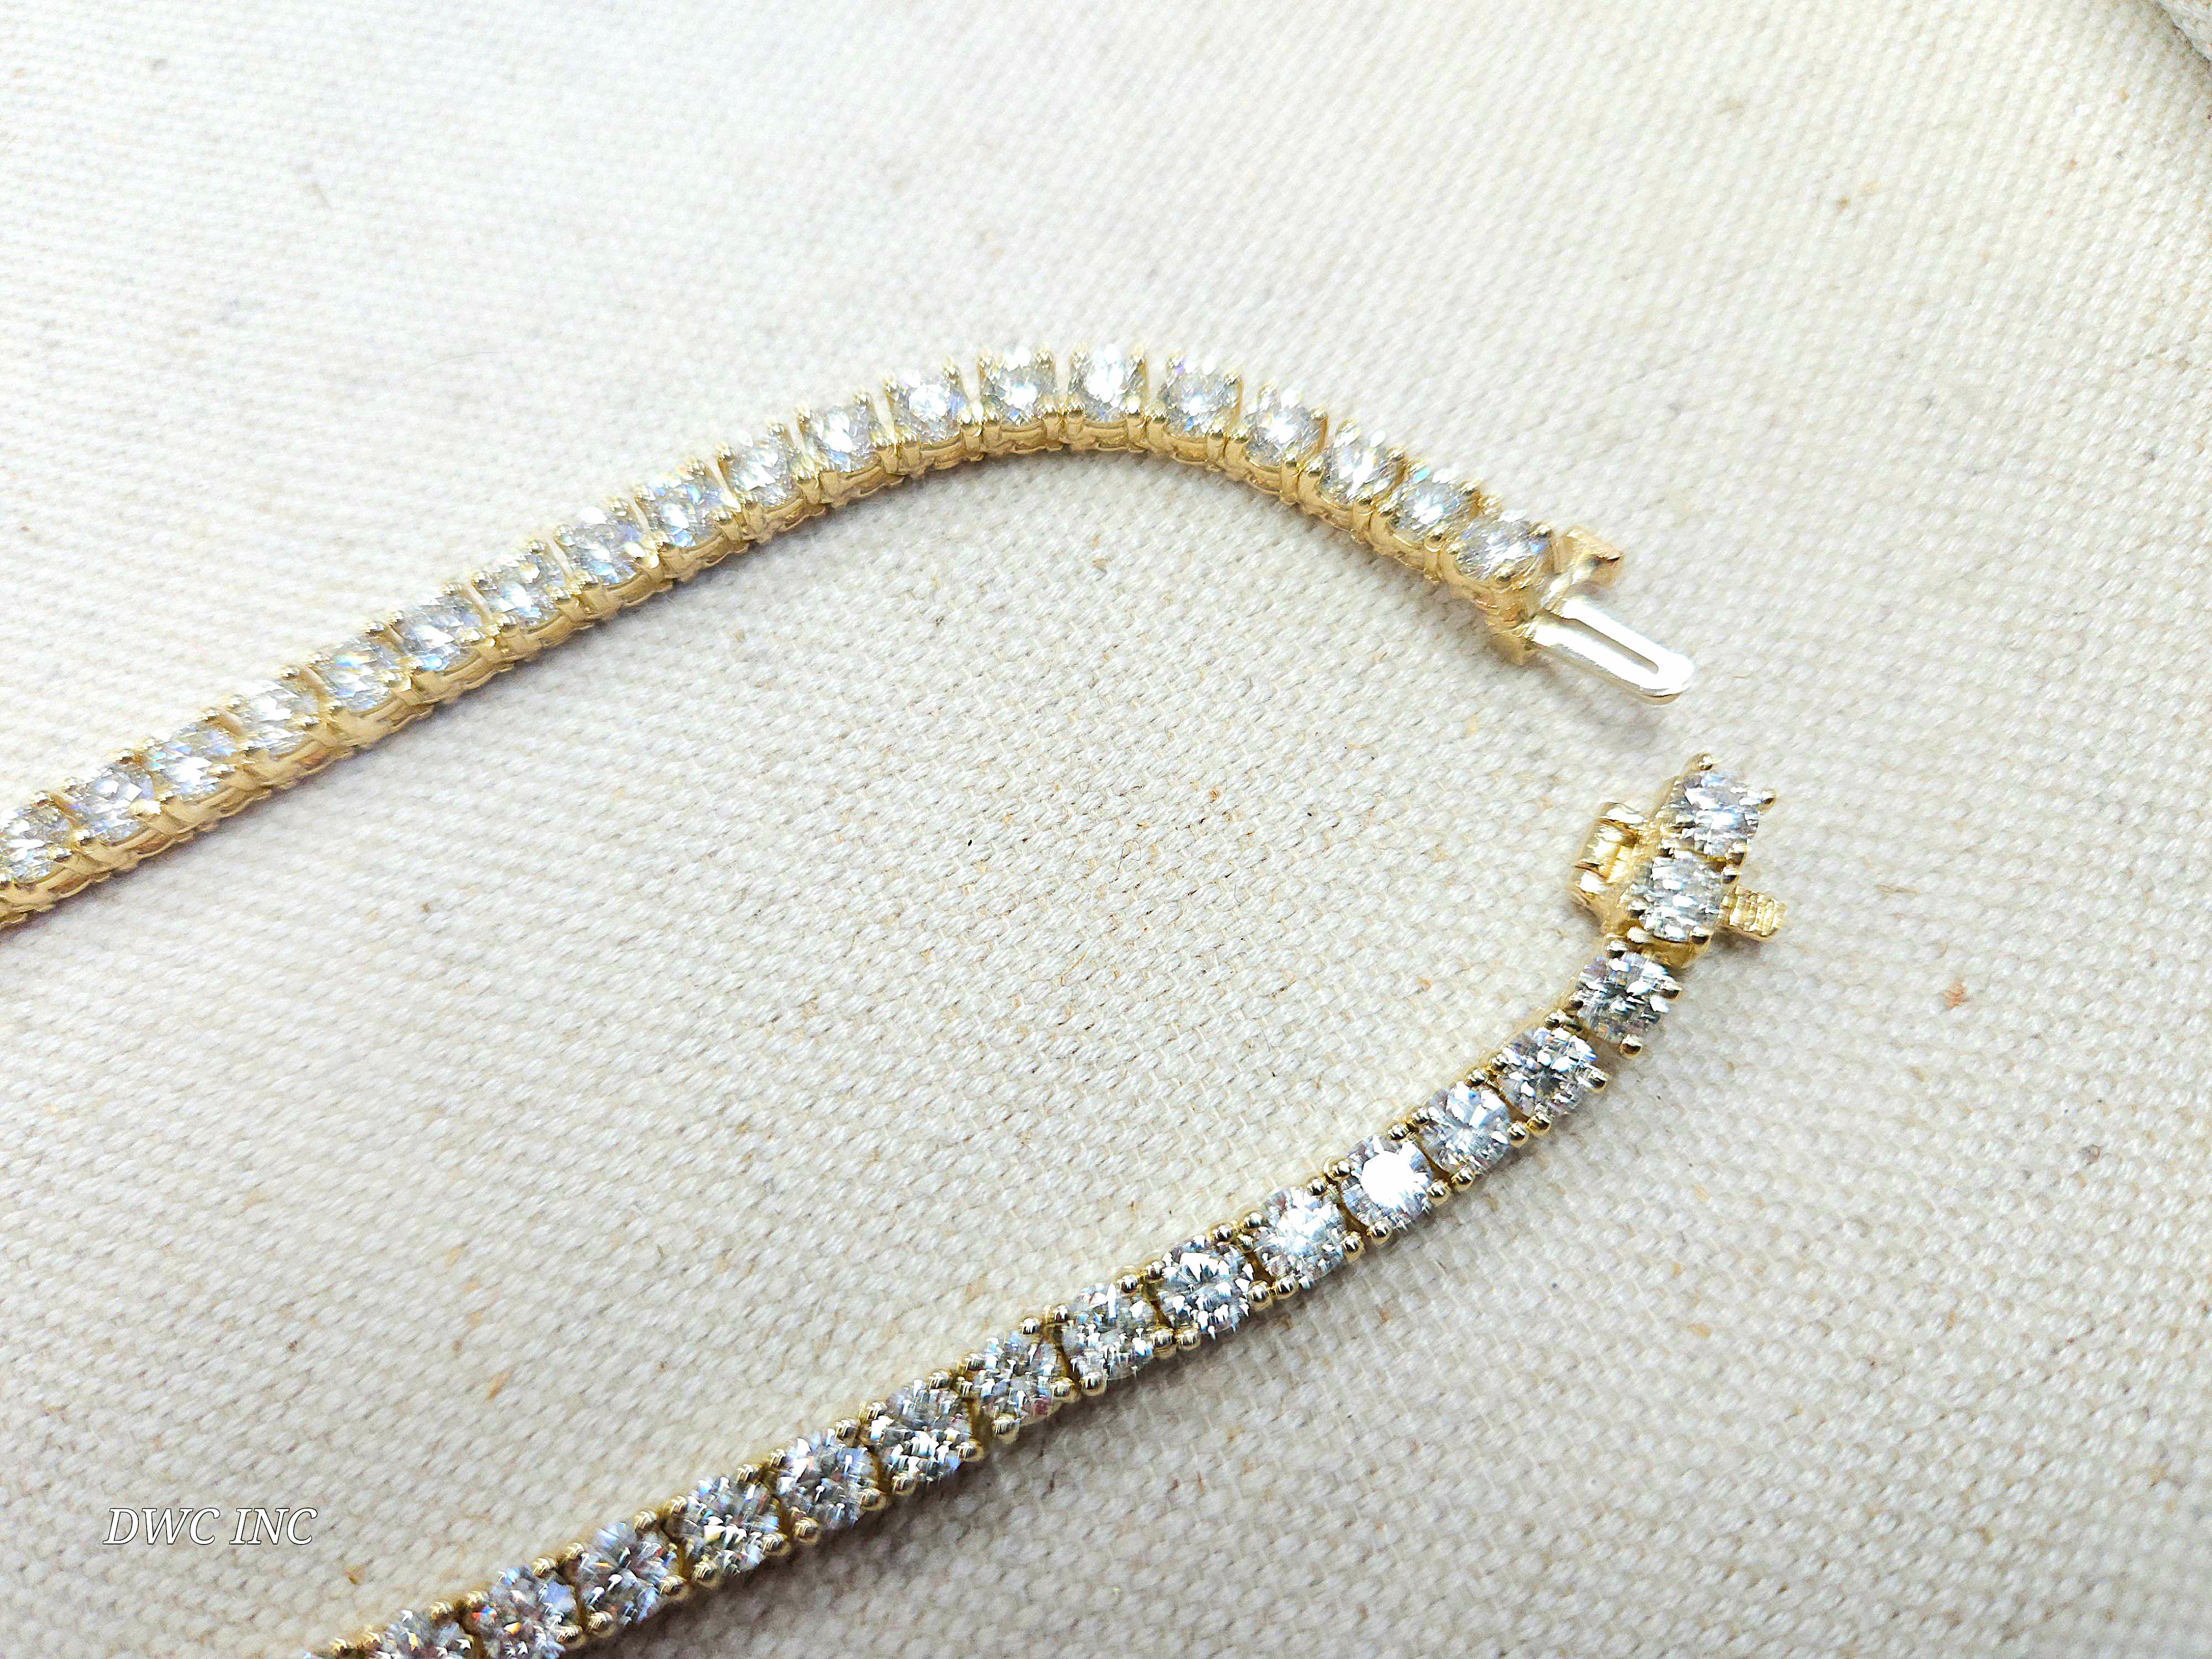 High beautiful quality tennis necklace, round-brilliant cut white diamonds clean and Excellent shine. 
14k yellow gold classic four-prong style for maximum light brilliance. 
18 inch length. Average Color H, Clarity VVS-VS 30.96 gram

*Free shipping